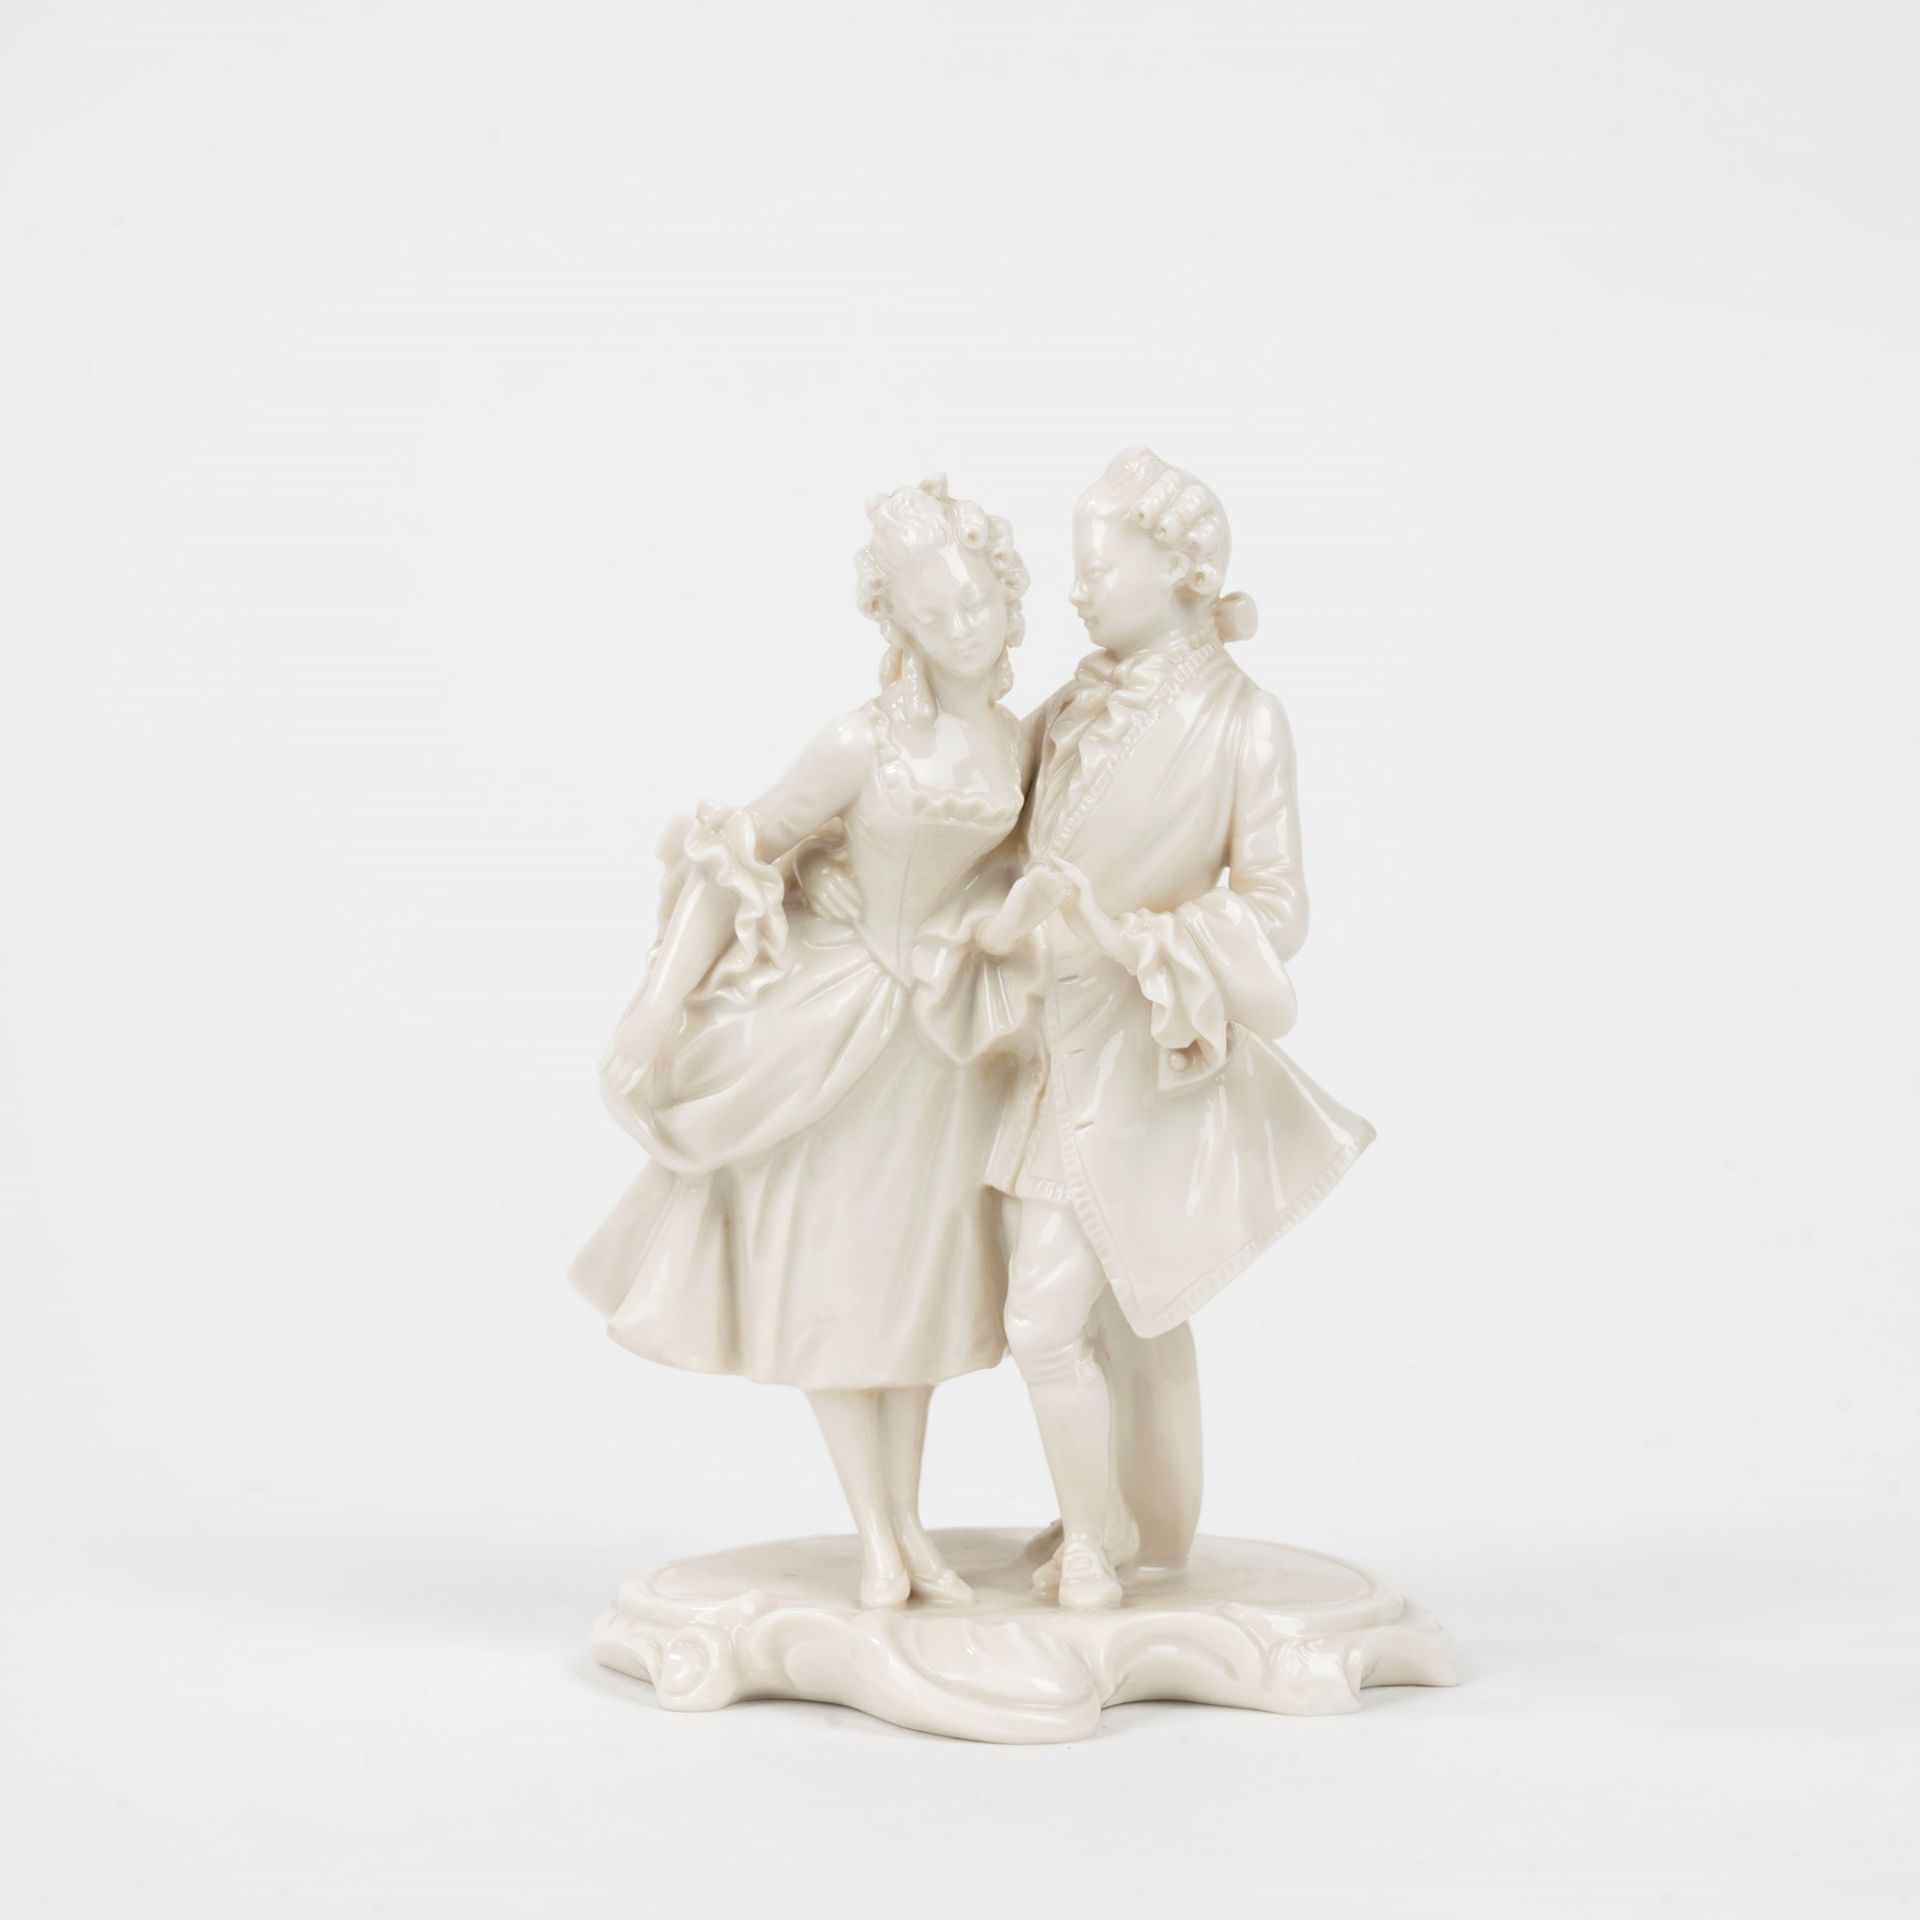 Lot consisting of seven white porcelain sculptures, 20th century - Image 4 of 10